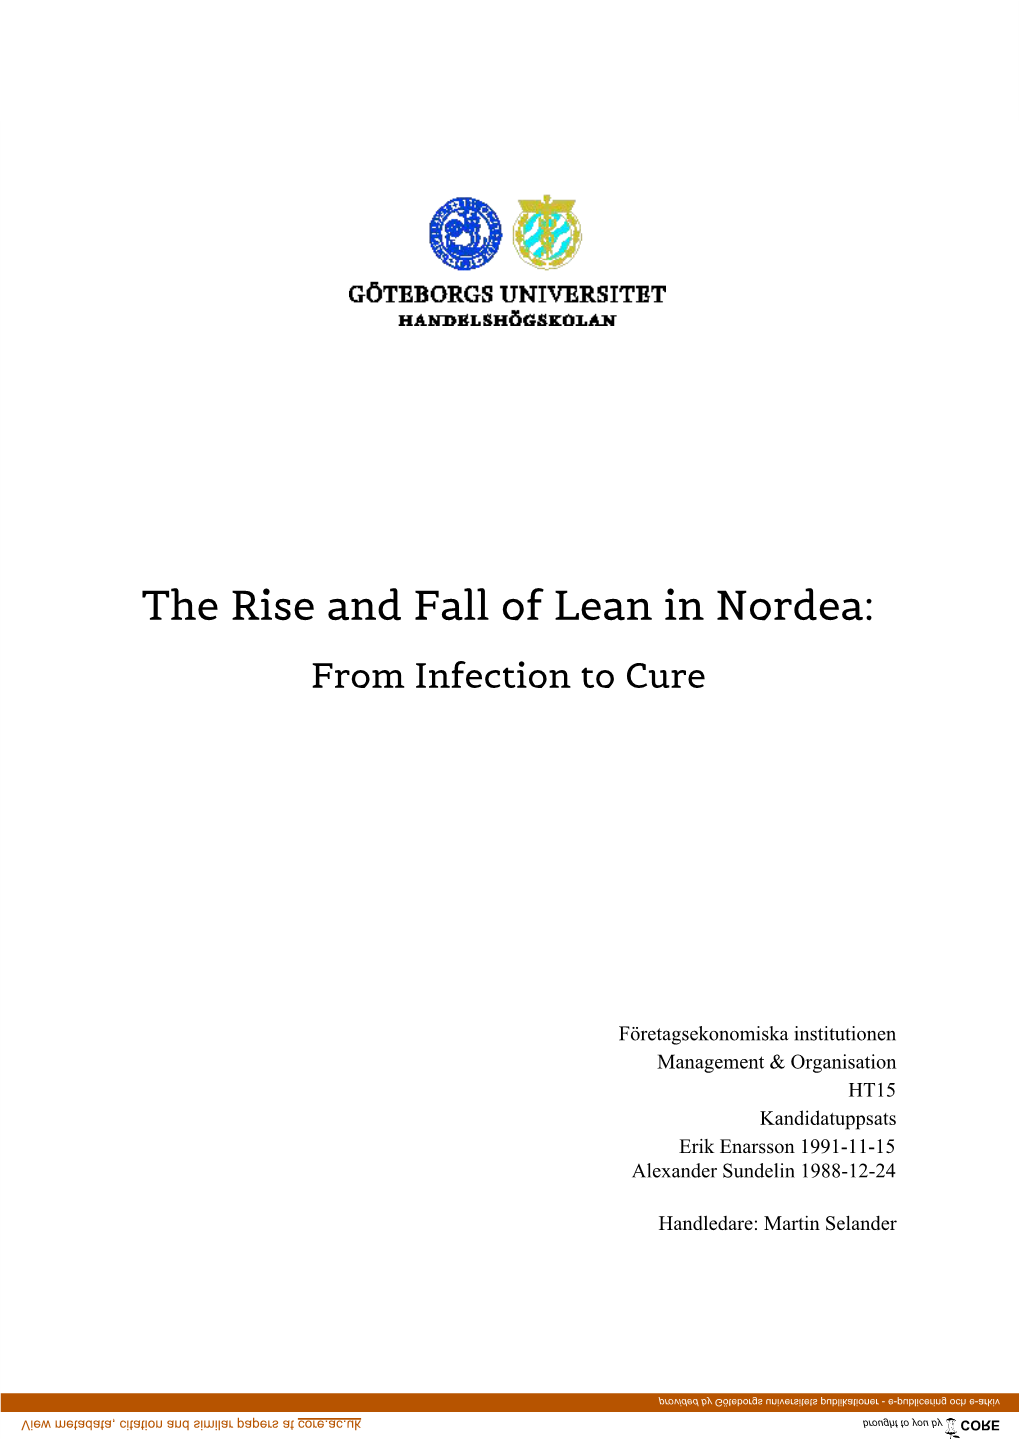 The Rise and Fall of Lean in Nordea: from Infection to Cure